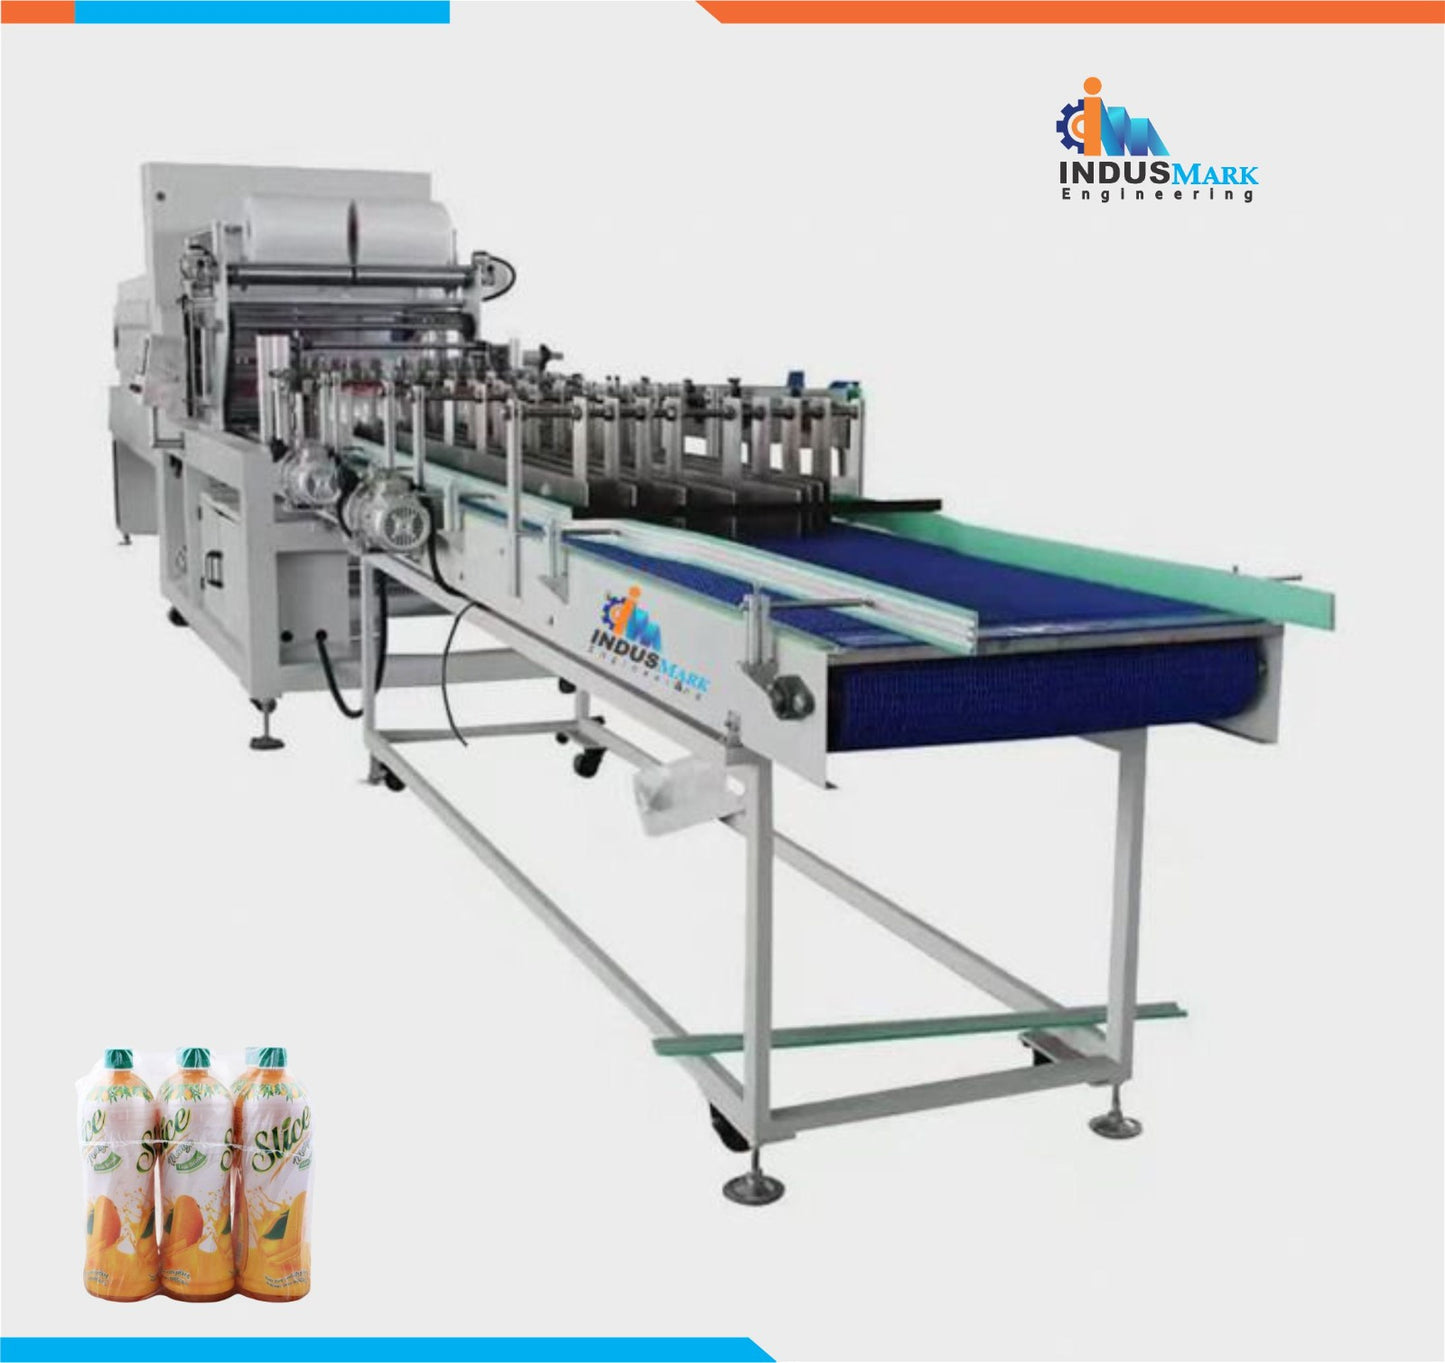 Food PE Film Wrapping Machine - Automatic Linear Type Film Shrink Wrapping Machine With Half Tray